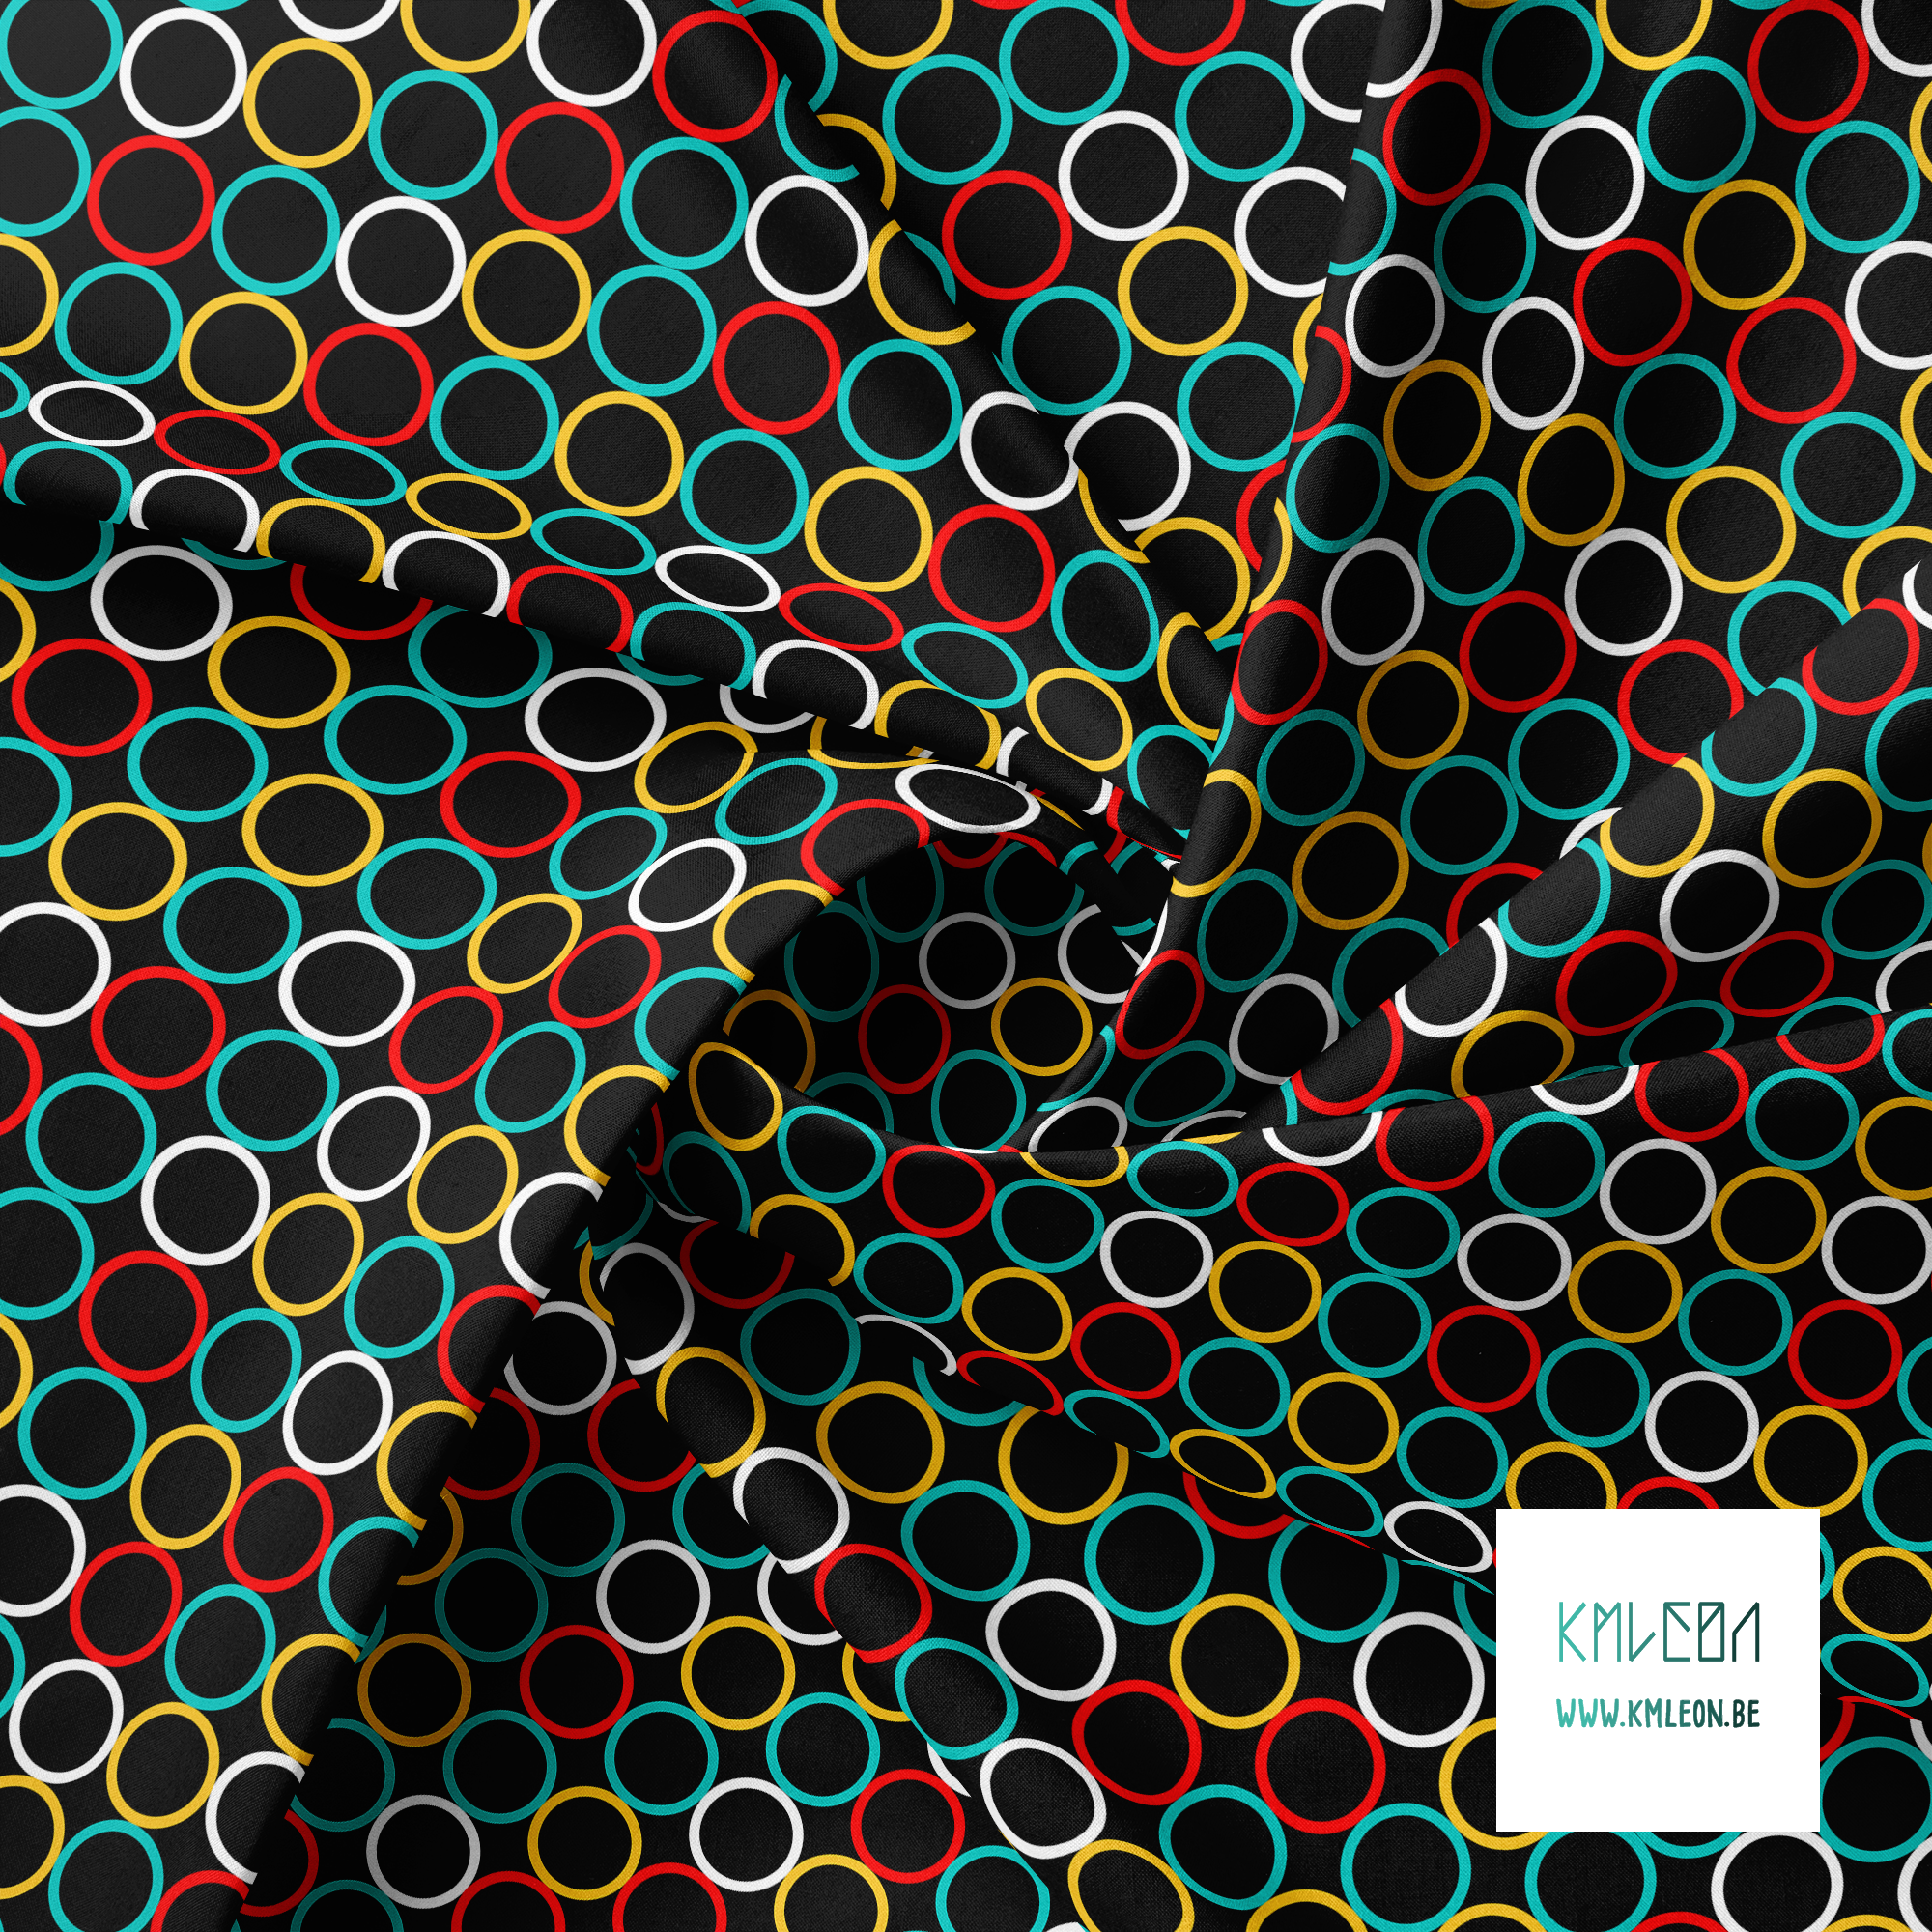 Random yellow, red, teal and white circles fabric